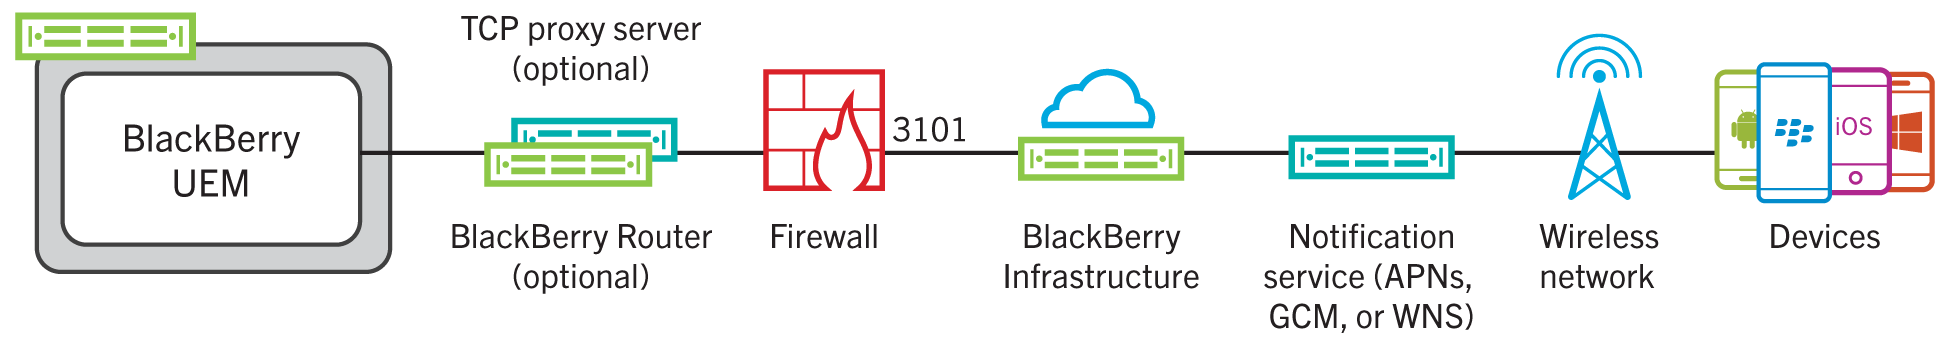 This diagram shows how BlackBerry UEM connects to the BlackBerry Infrastructure over port 3101